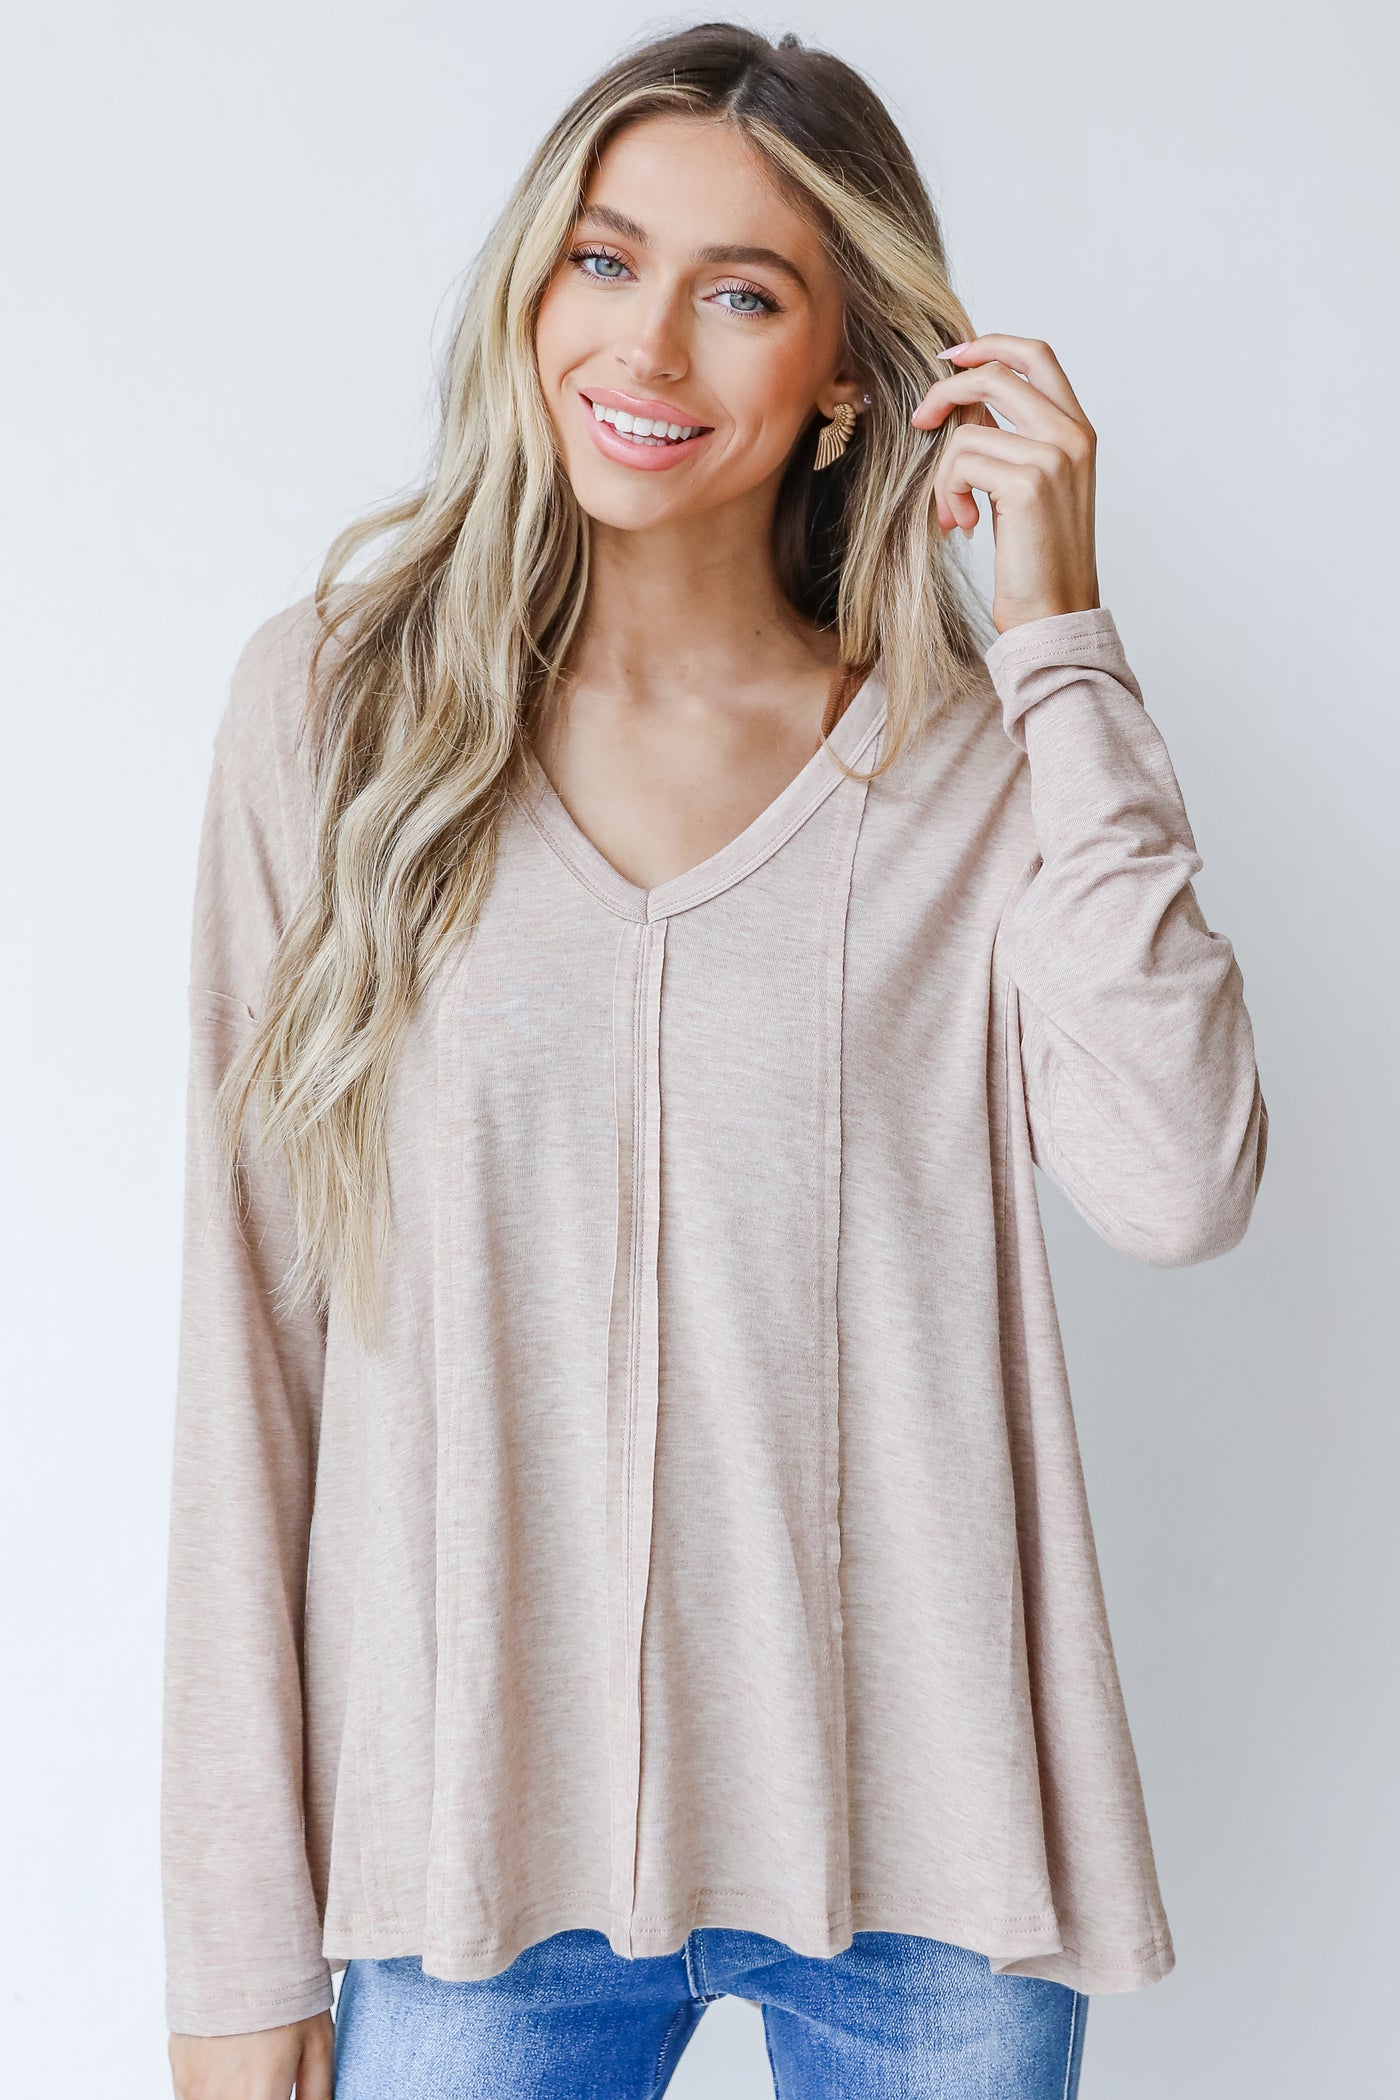 Jersey Knit Top in taupe